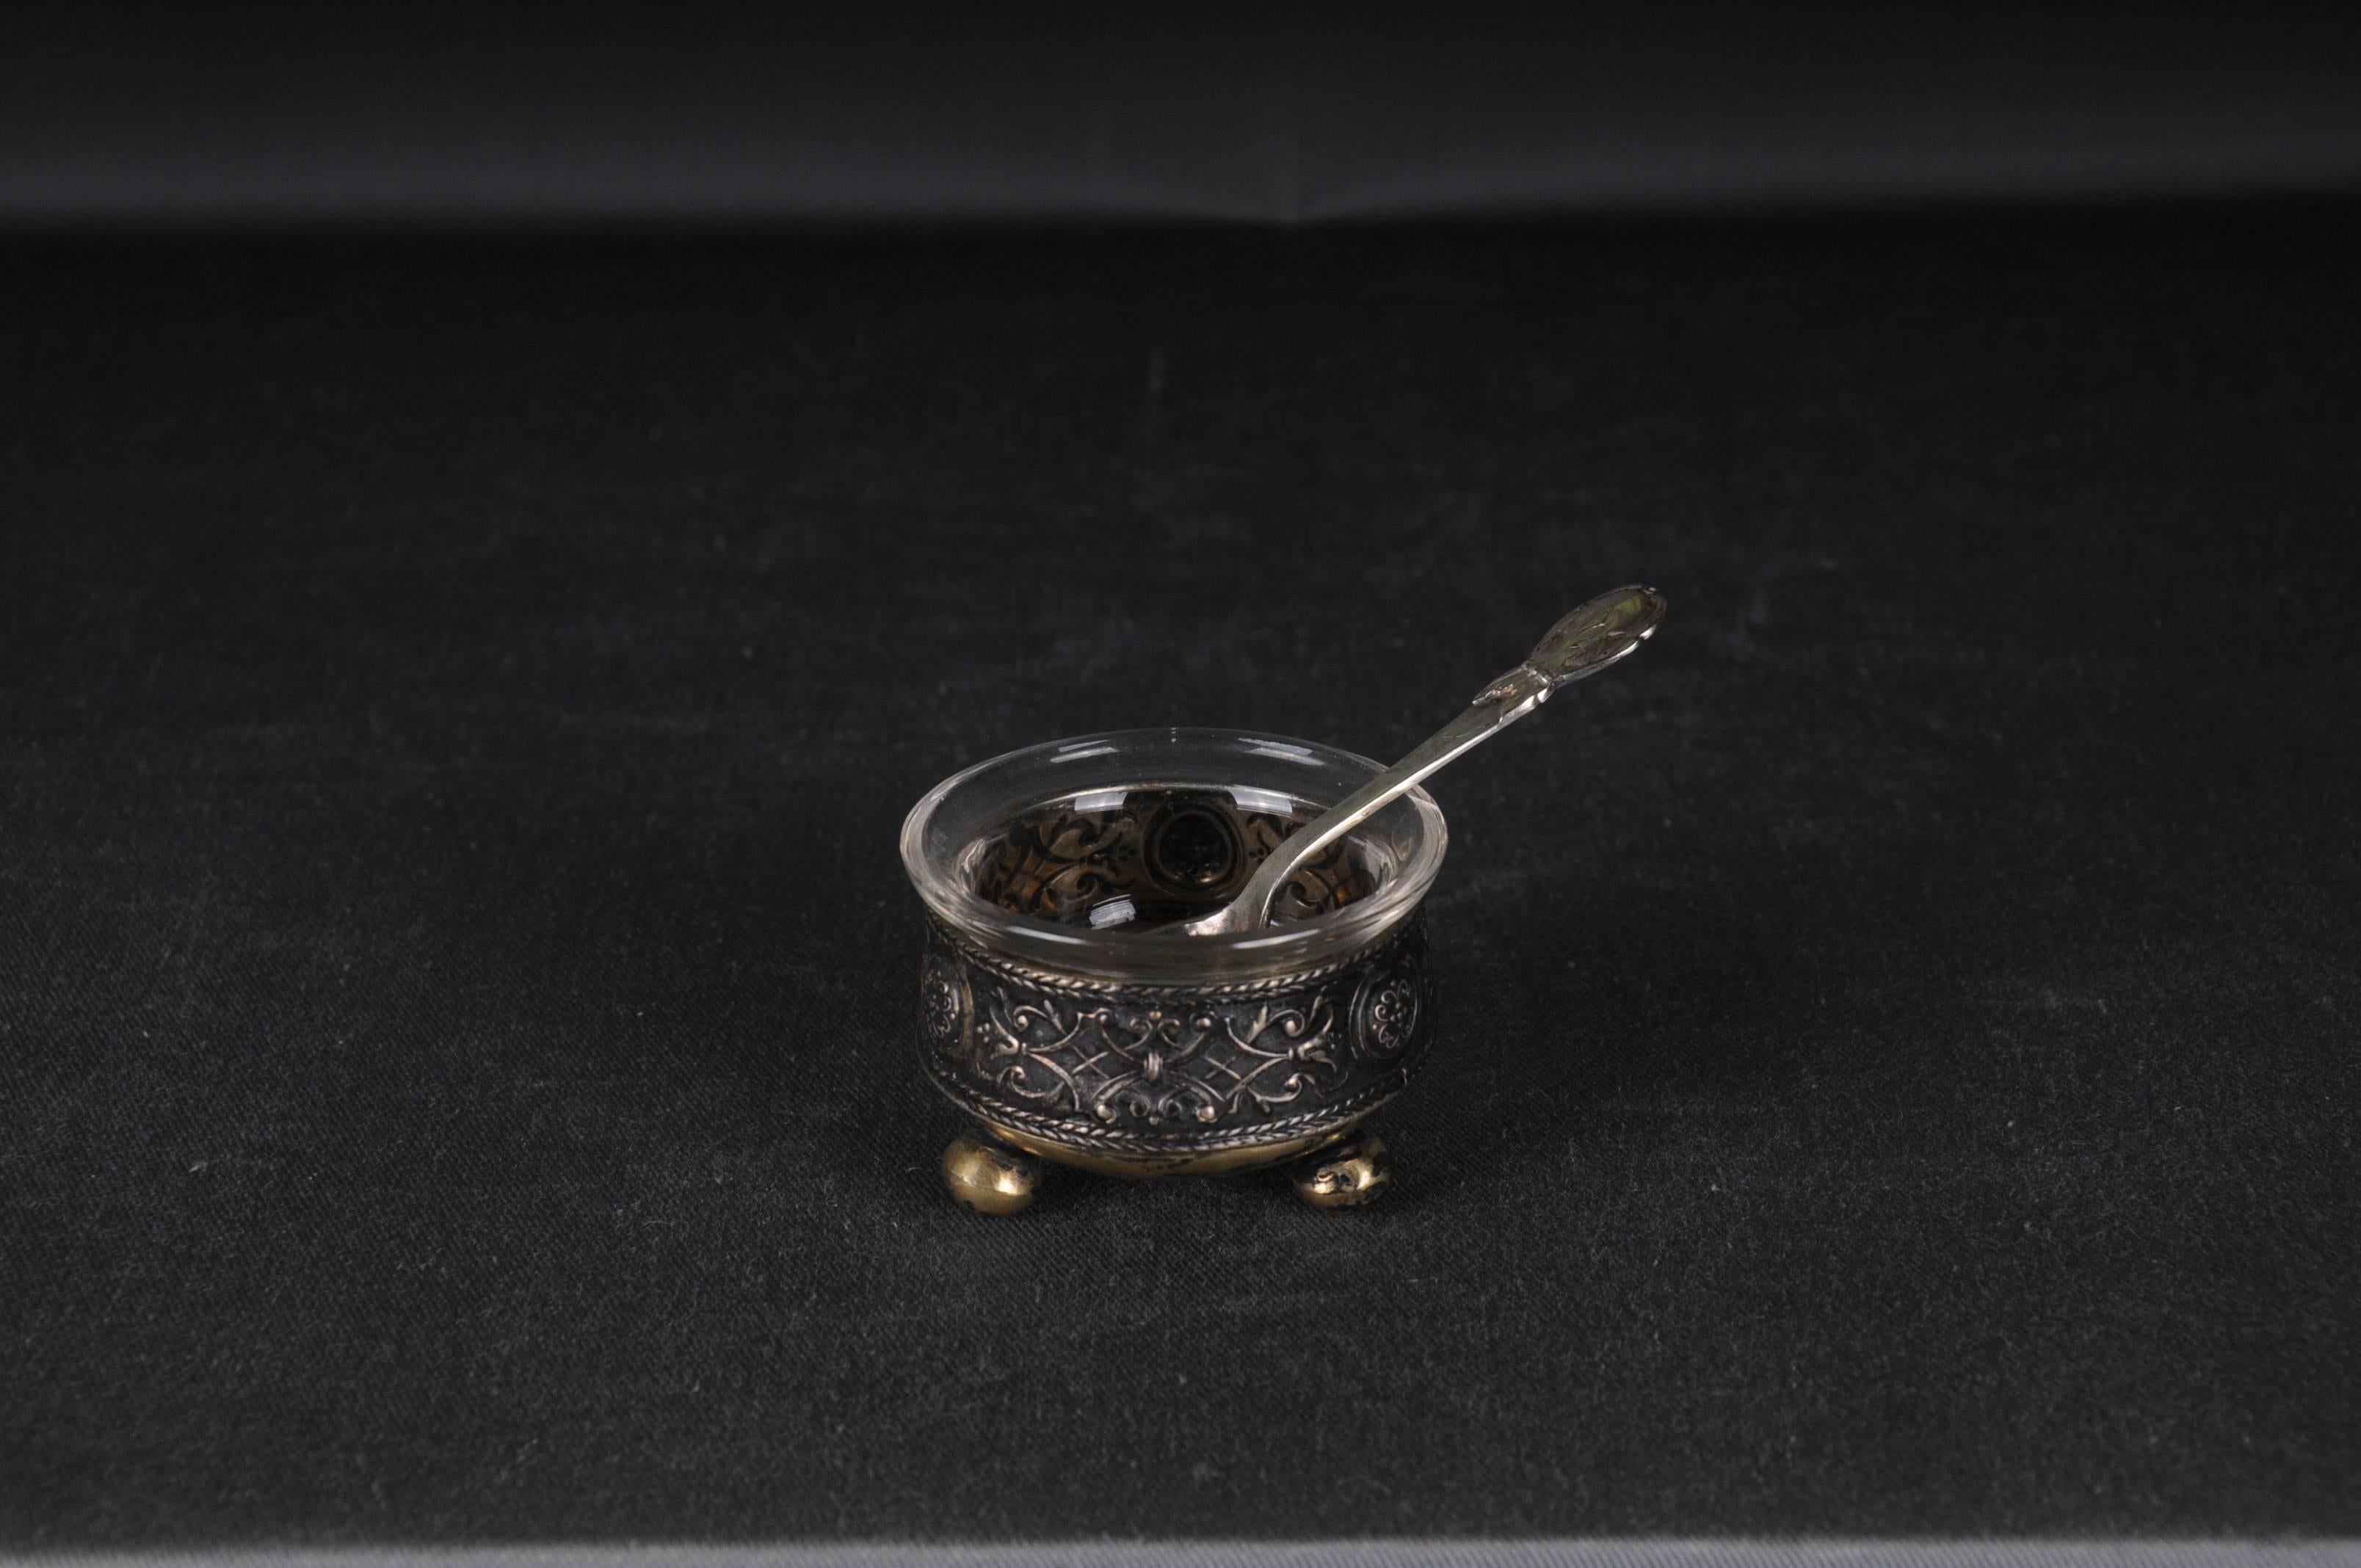 Antique Germany Caviar ball feet bowl with Spoon & glass insert, gilded

Bowl is 800 silver
Spoon is 830 silver
Glass has facet cut

Weight without glass 27 grams.
Weight with glass 60 grams

The condition can be seen in the pictures.